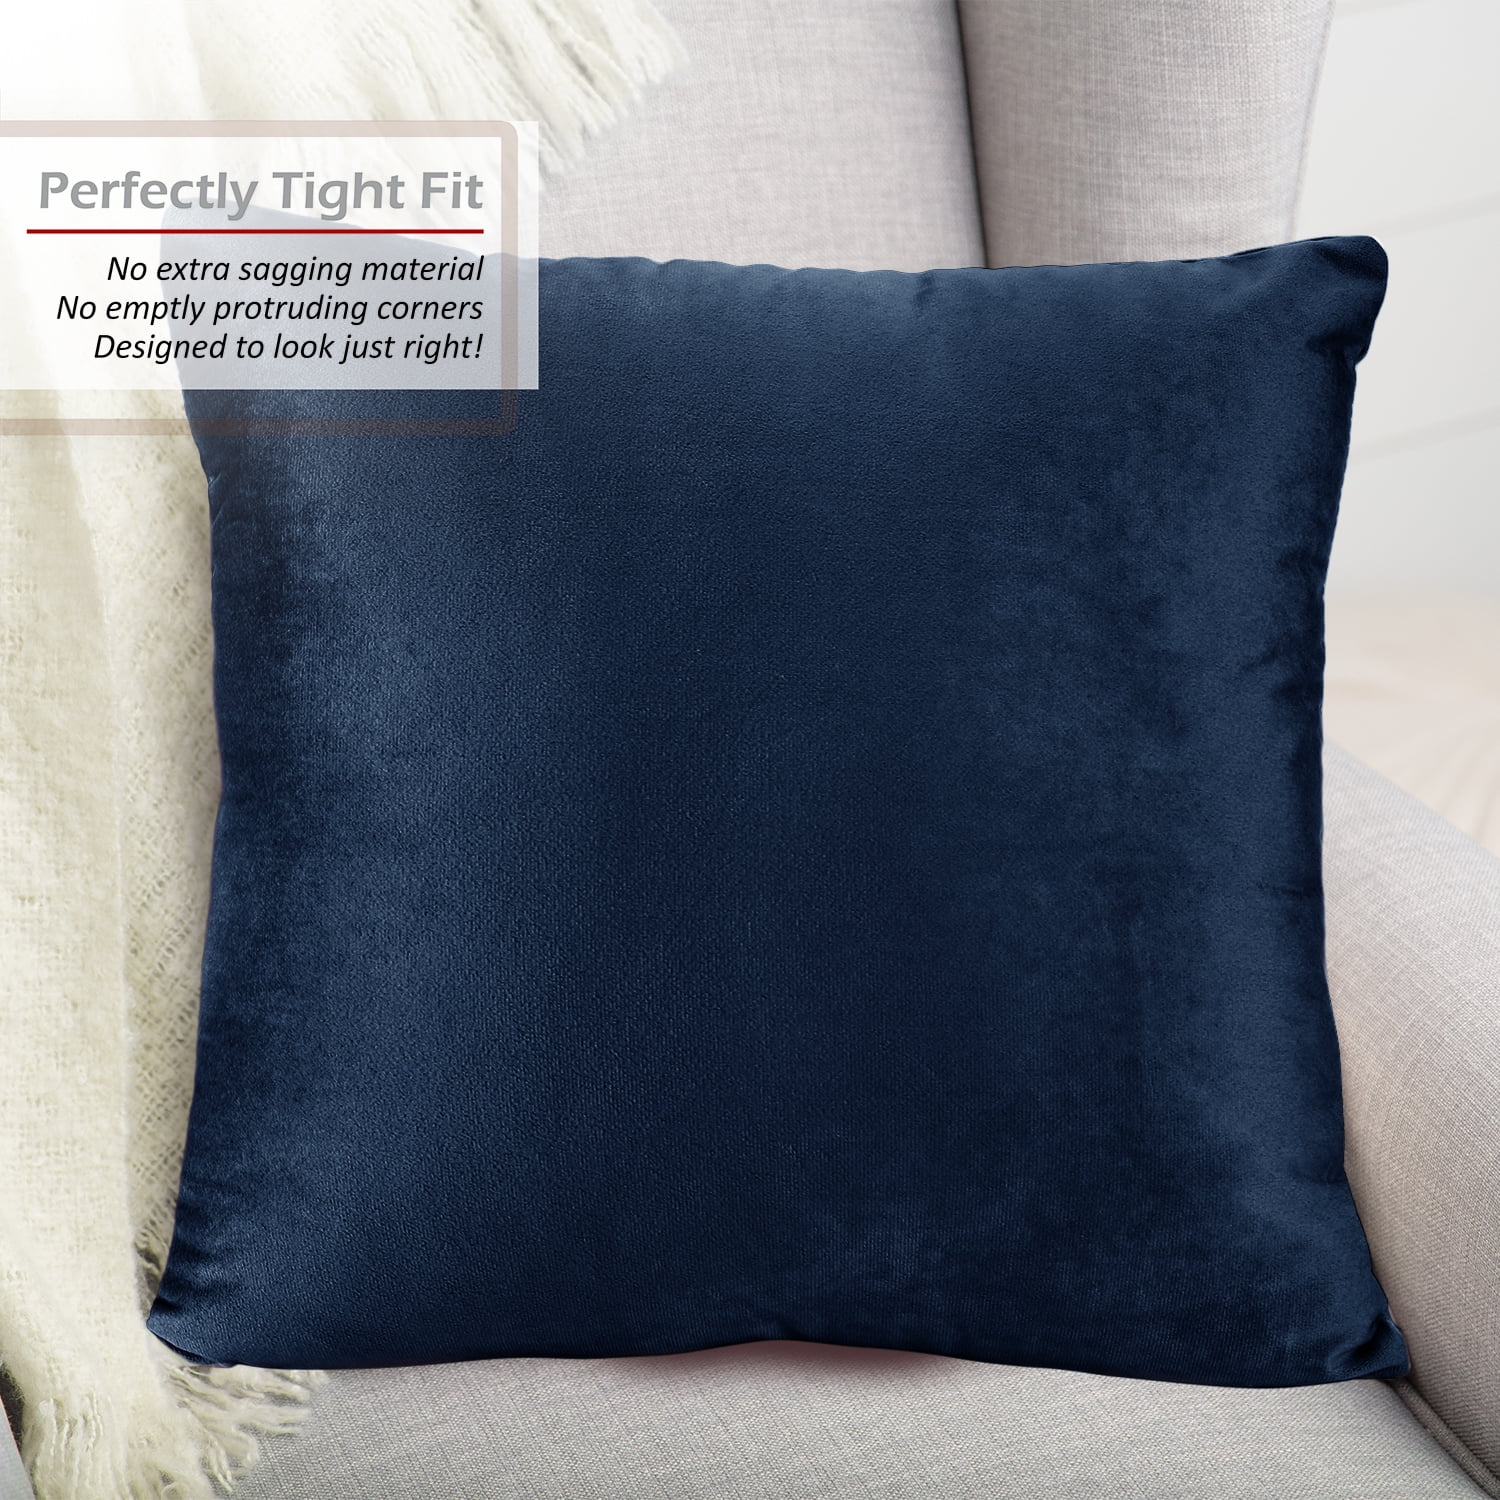 Top Finel Square Decorative Throw Pillow Cases Soft Microfiber Outdoor Cushion Covers 18 x 18 for Sofa Bedroom Set of 6 Navy